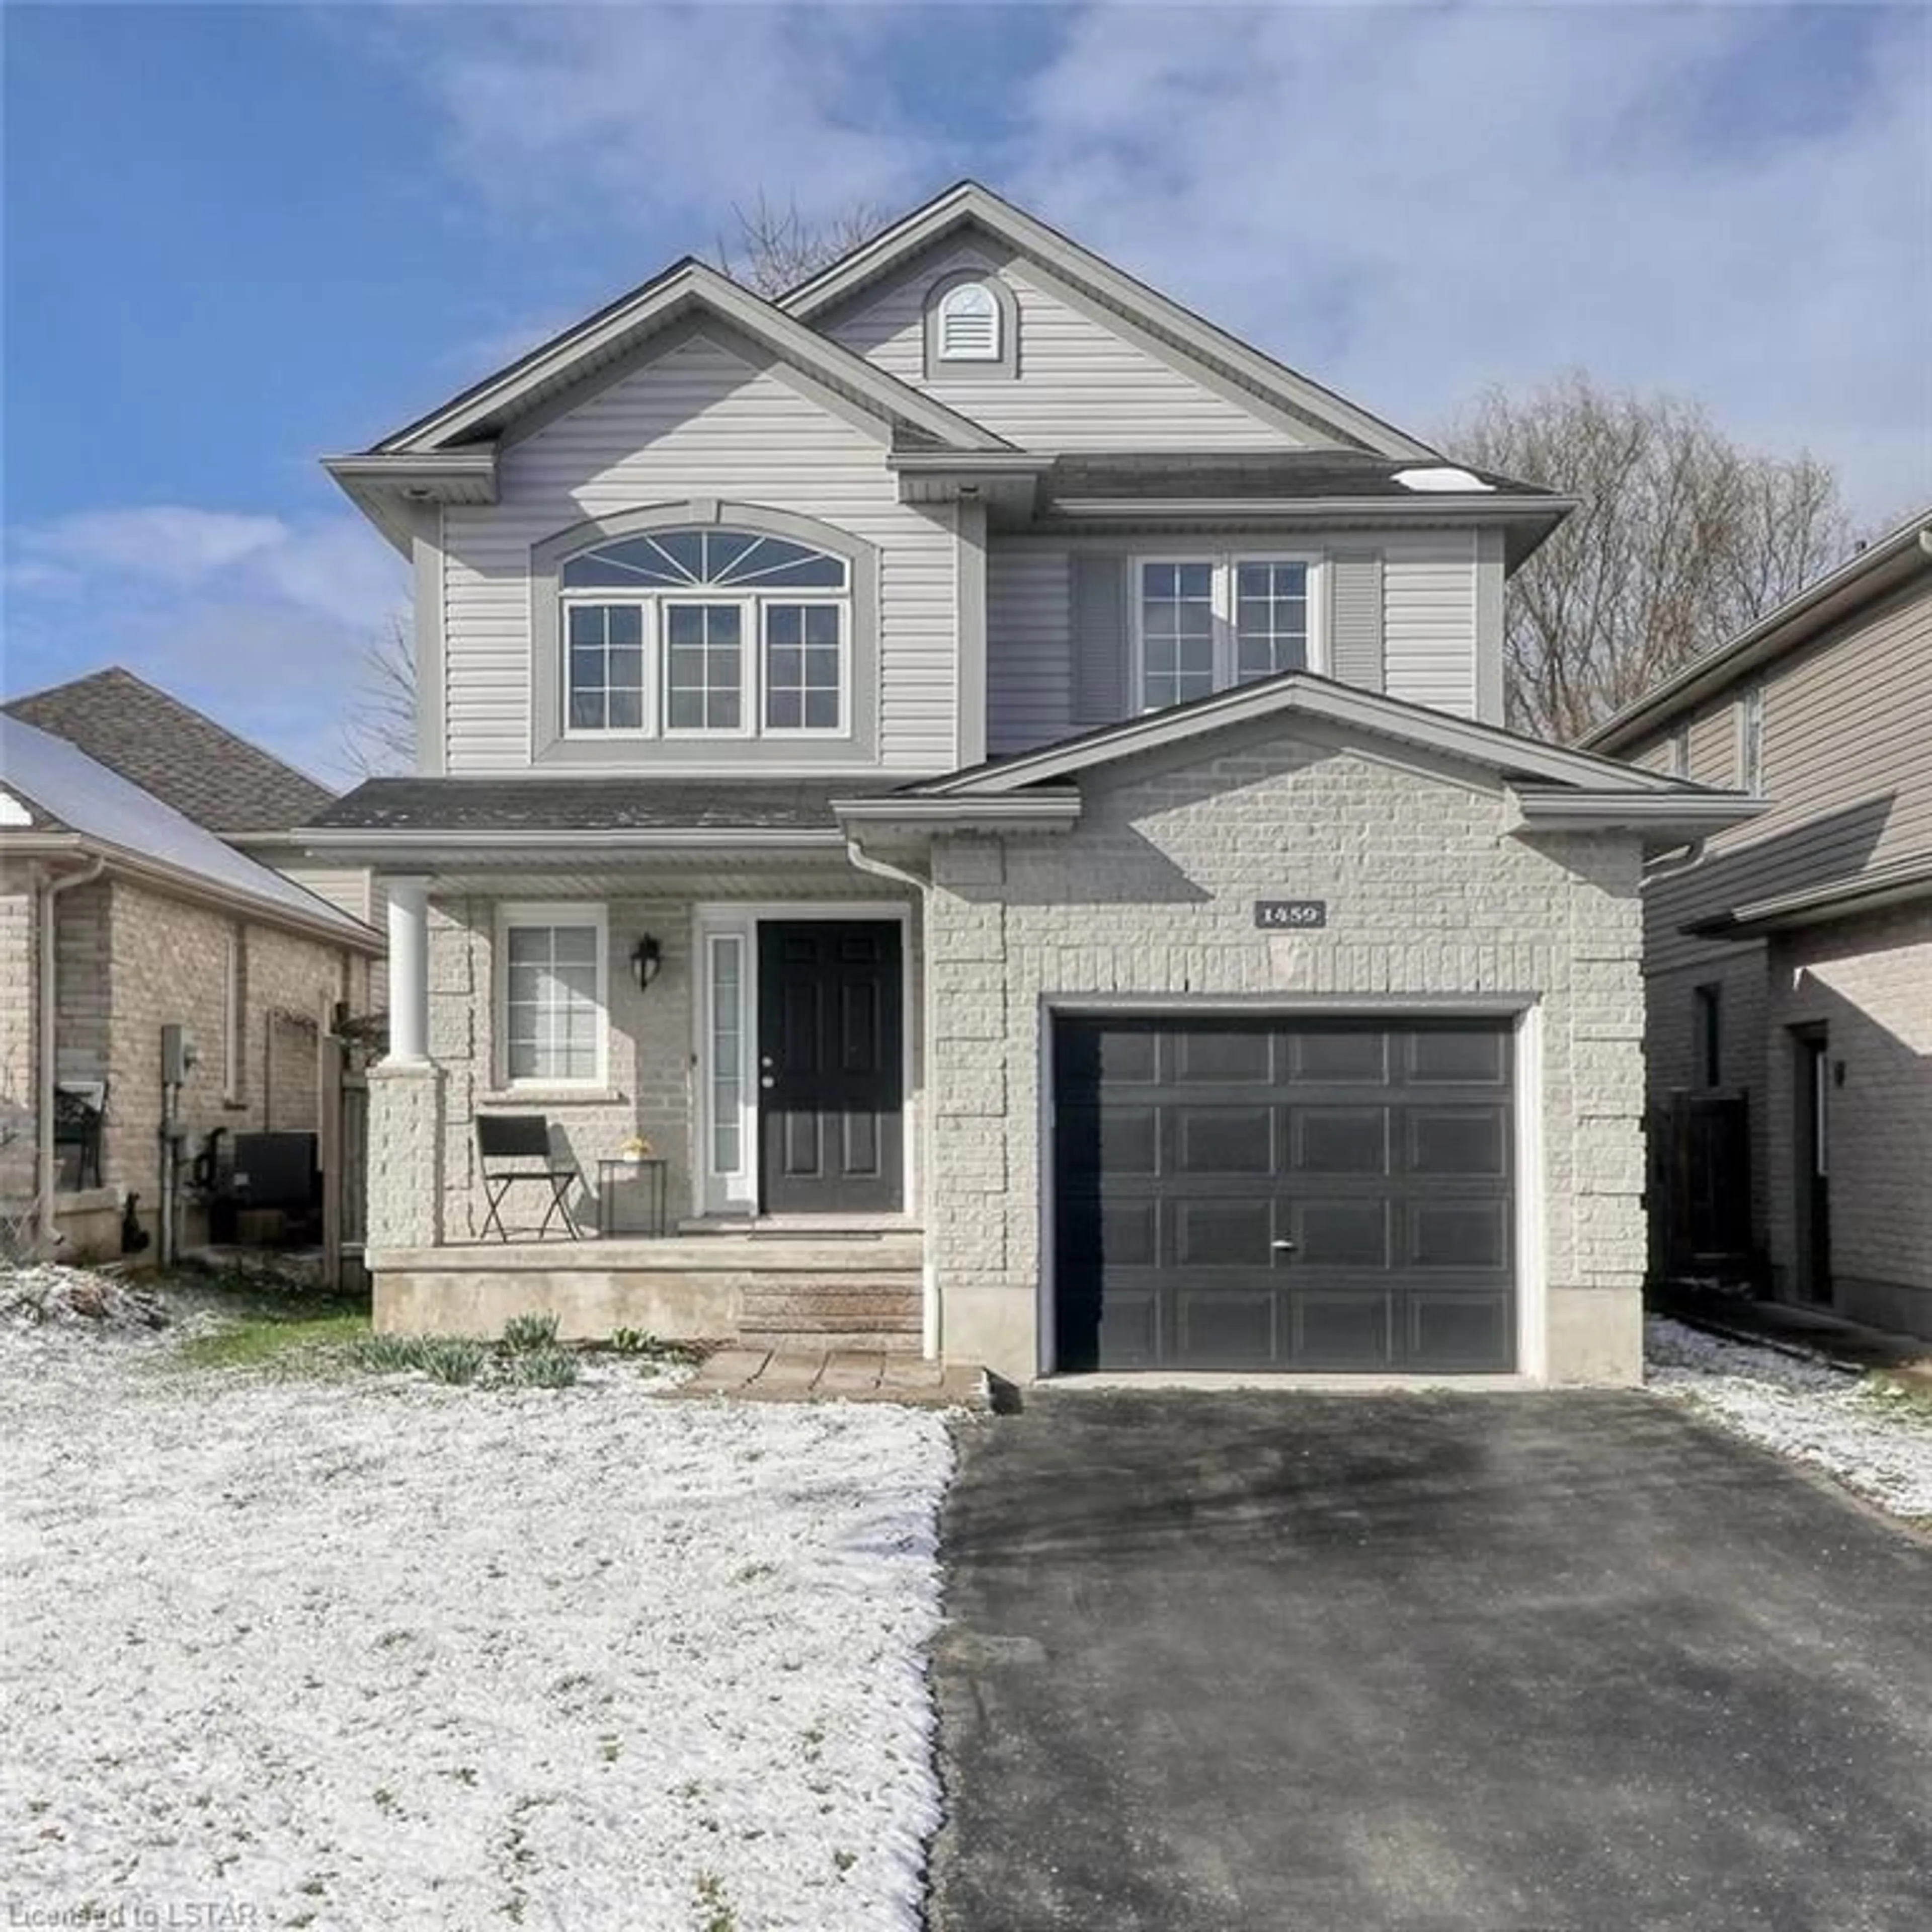 Home with unknown exterior material for 1459 Mickleborough Dr, London Ontario N6G 5R6